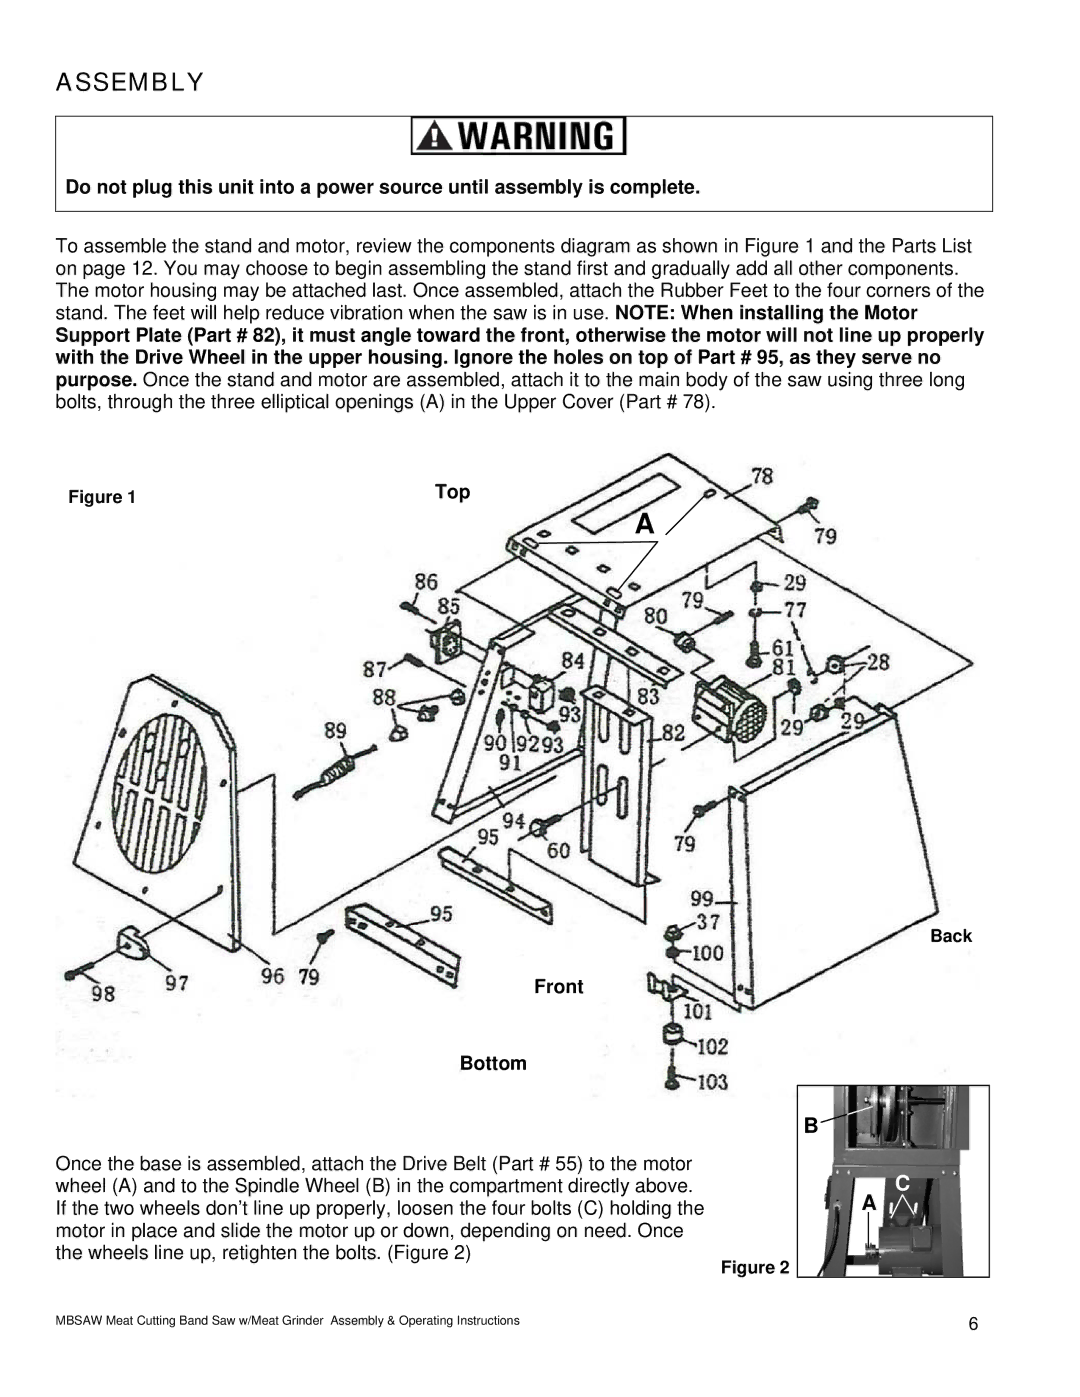 Buffalo Tools IW12BX operating instructions Assembly, Front Bottom 